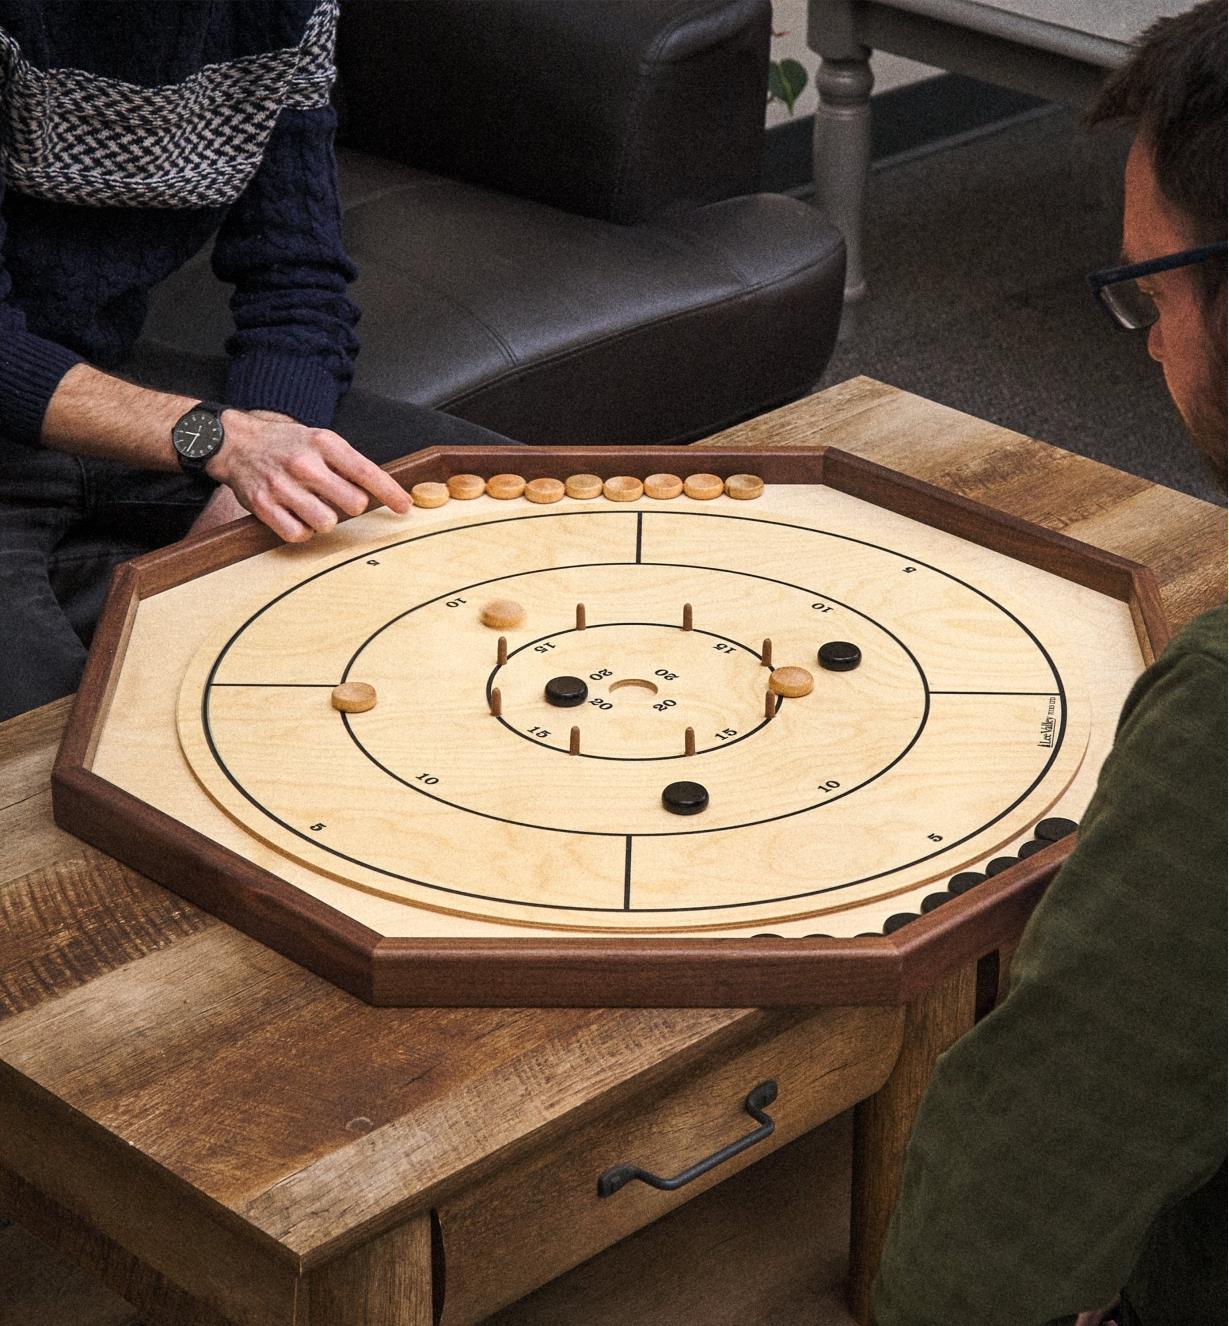 Playing crokinole on a deluxe crokinole, checker and chess board